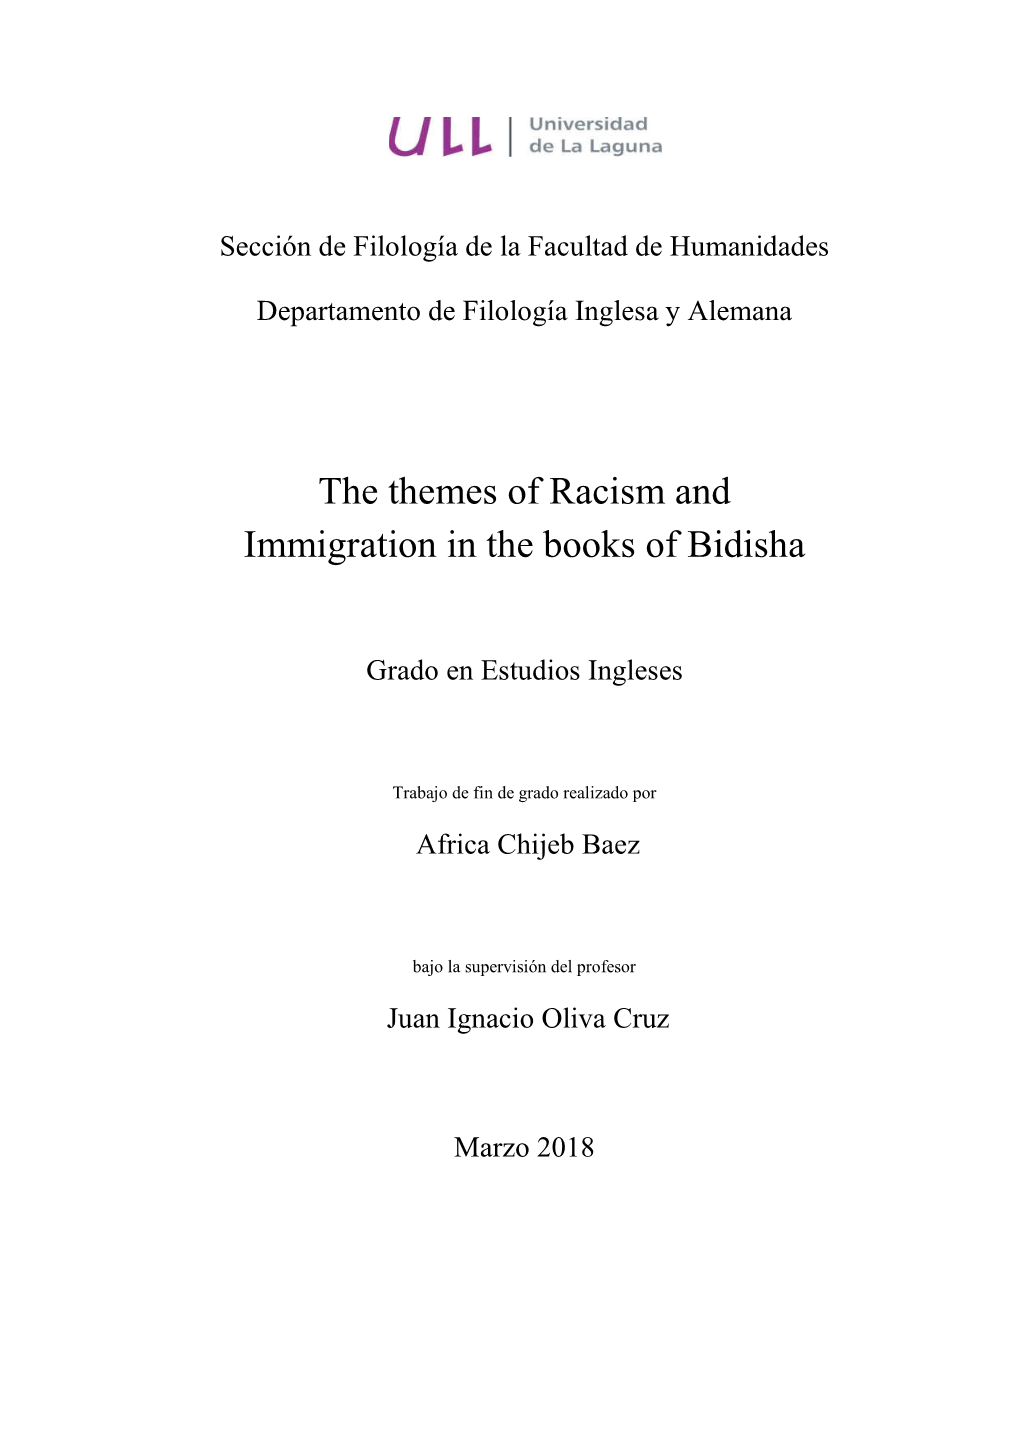 The Themes of Racism and Immigration in the Books of Bidisha